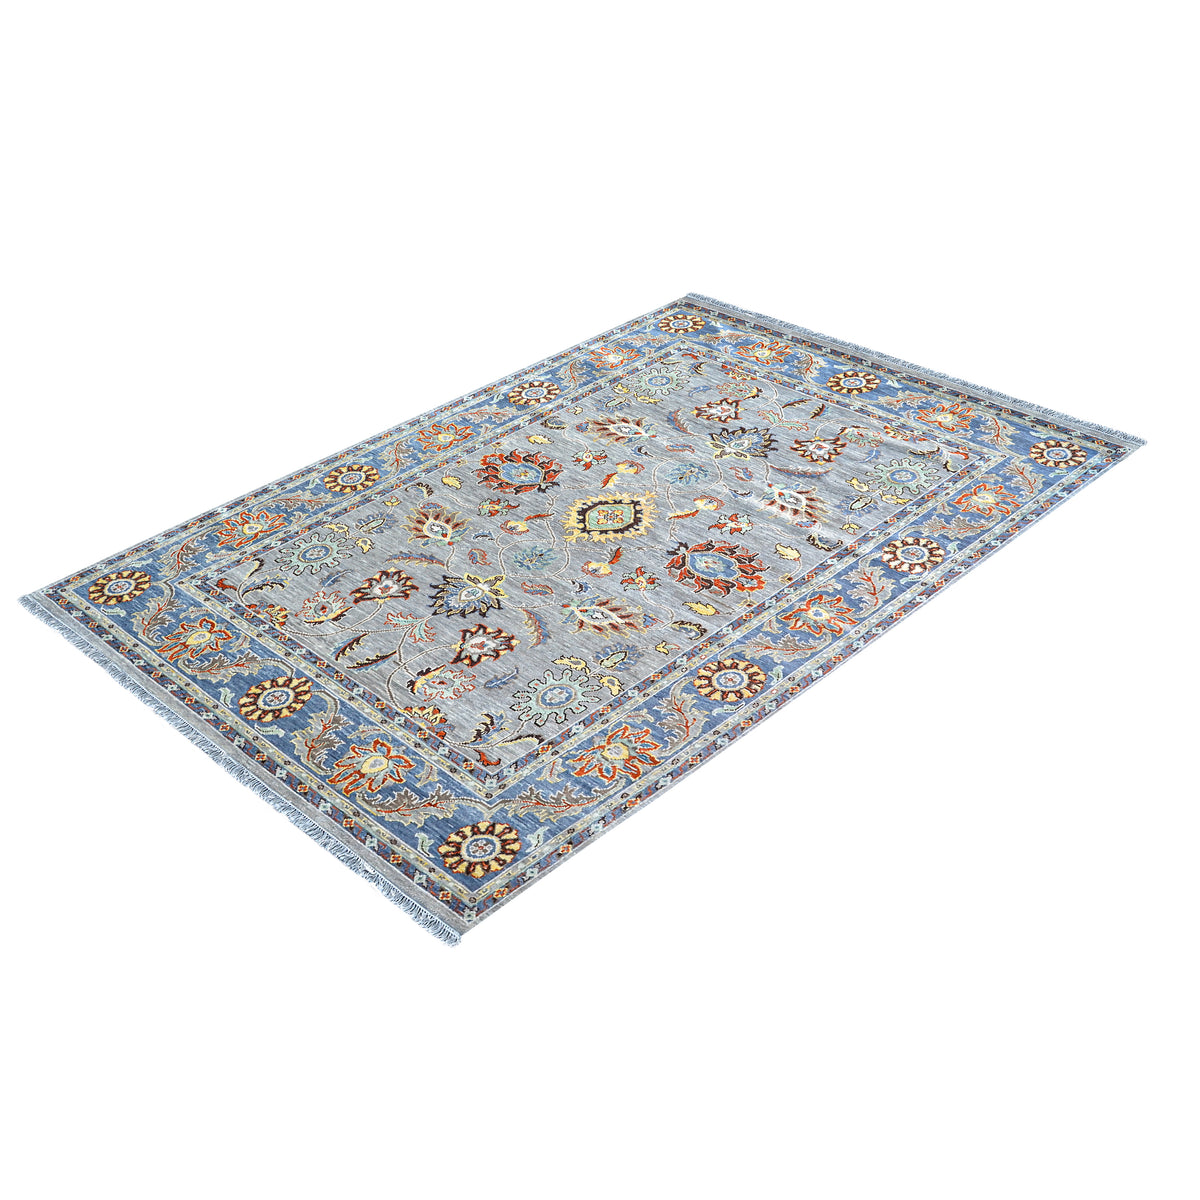 Fine Hand-knotted Wool Oushak Large Rug 283cm x 364cm